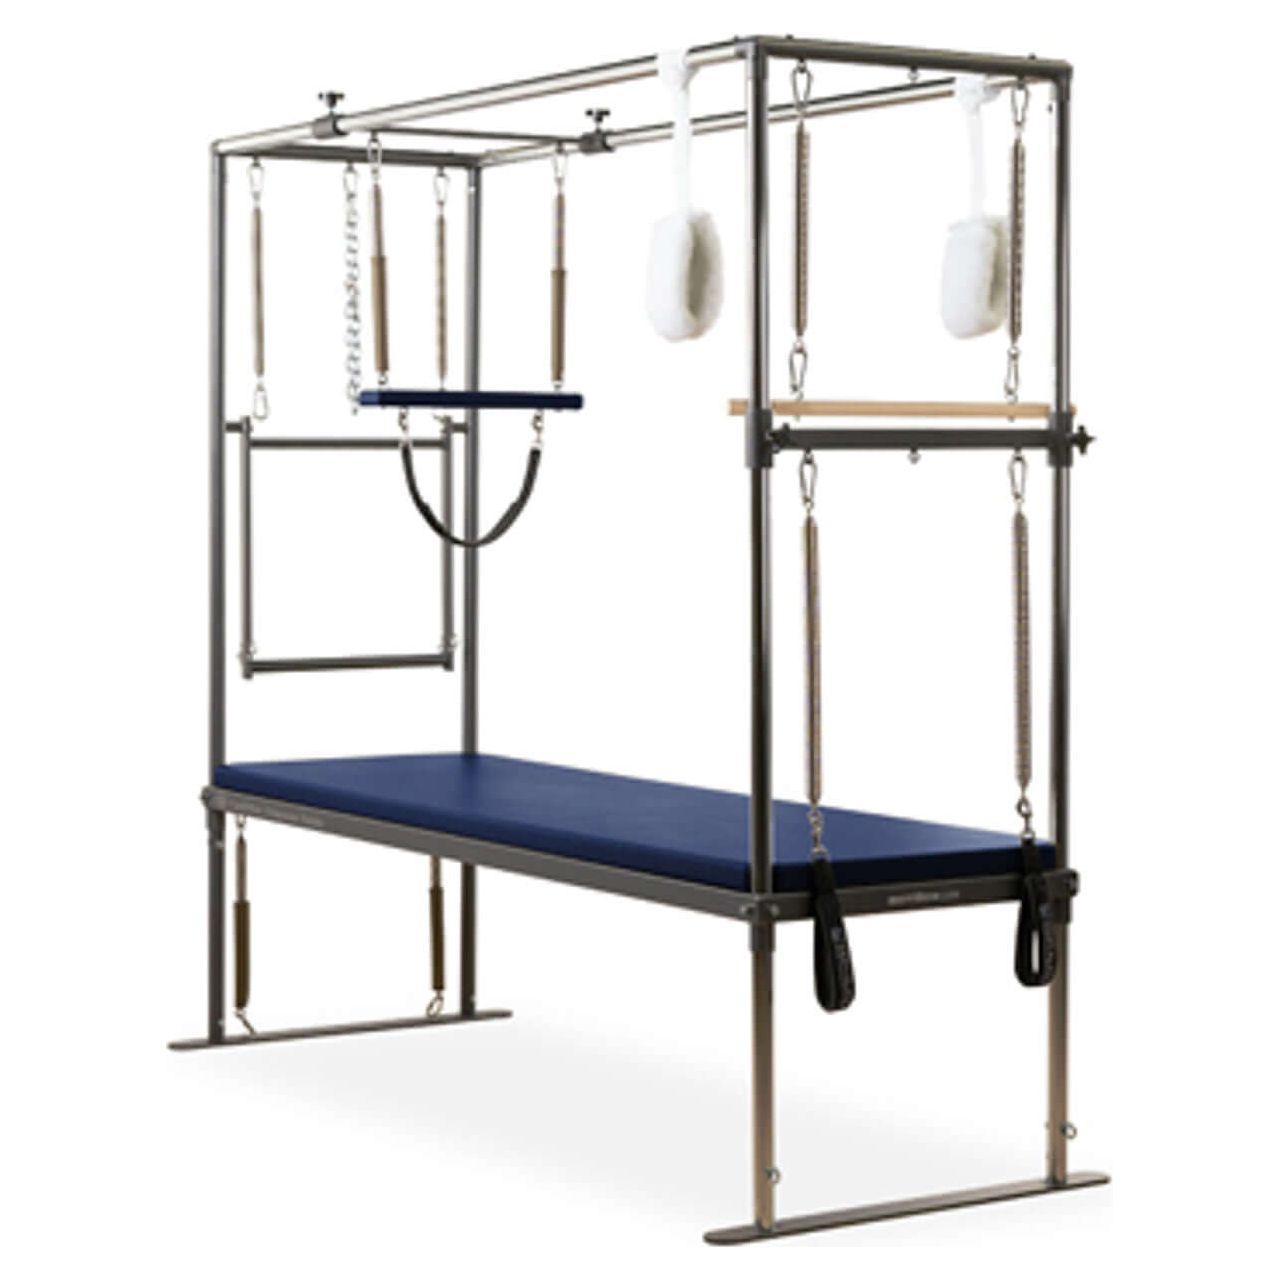 Royal Blue Merrithew Cadillac Trapeze Table with Online Sale Options